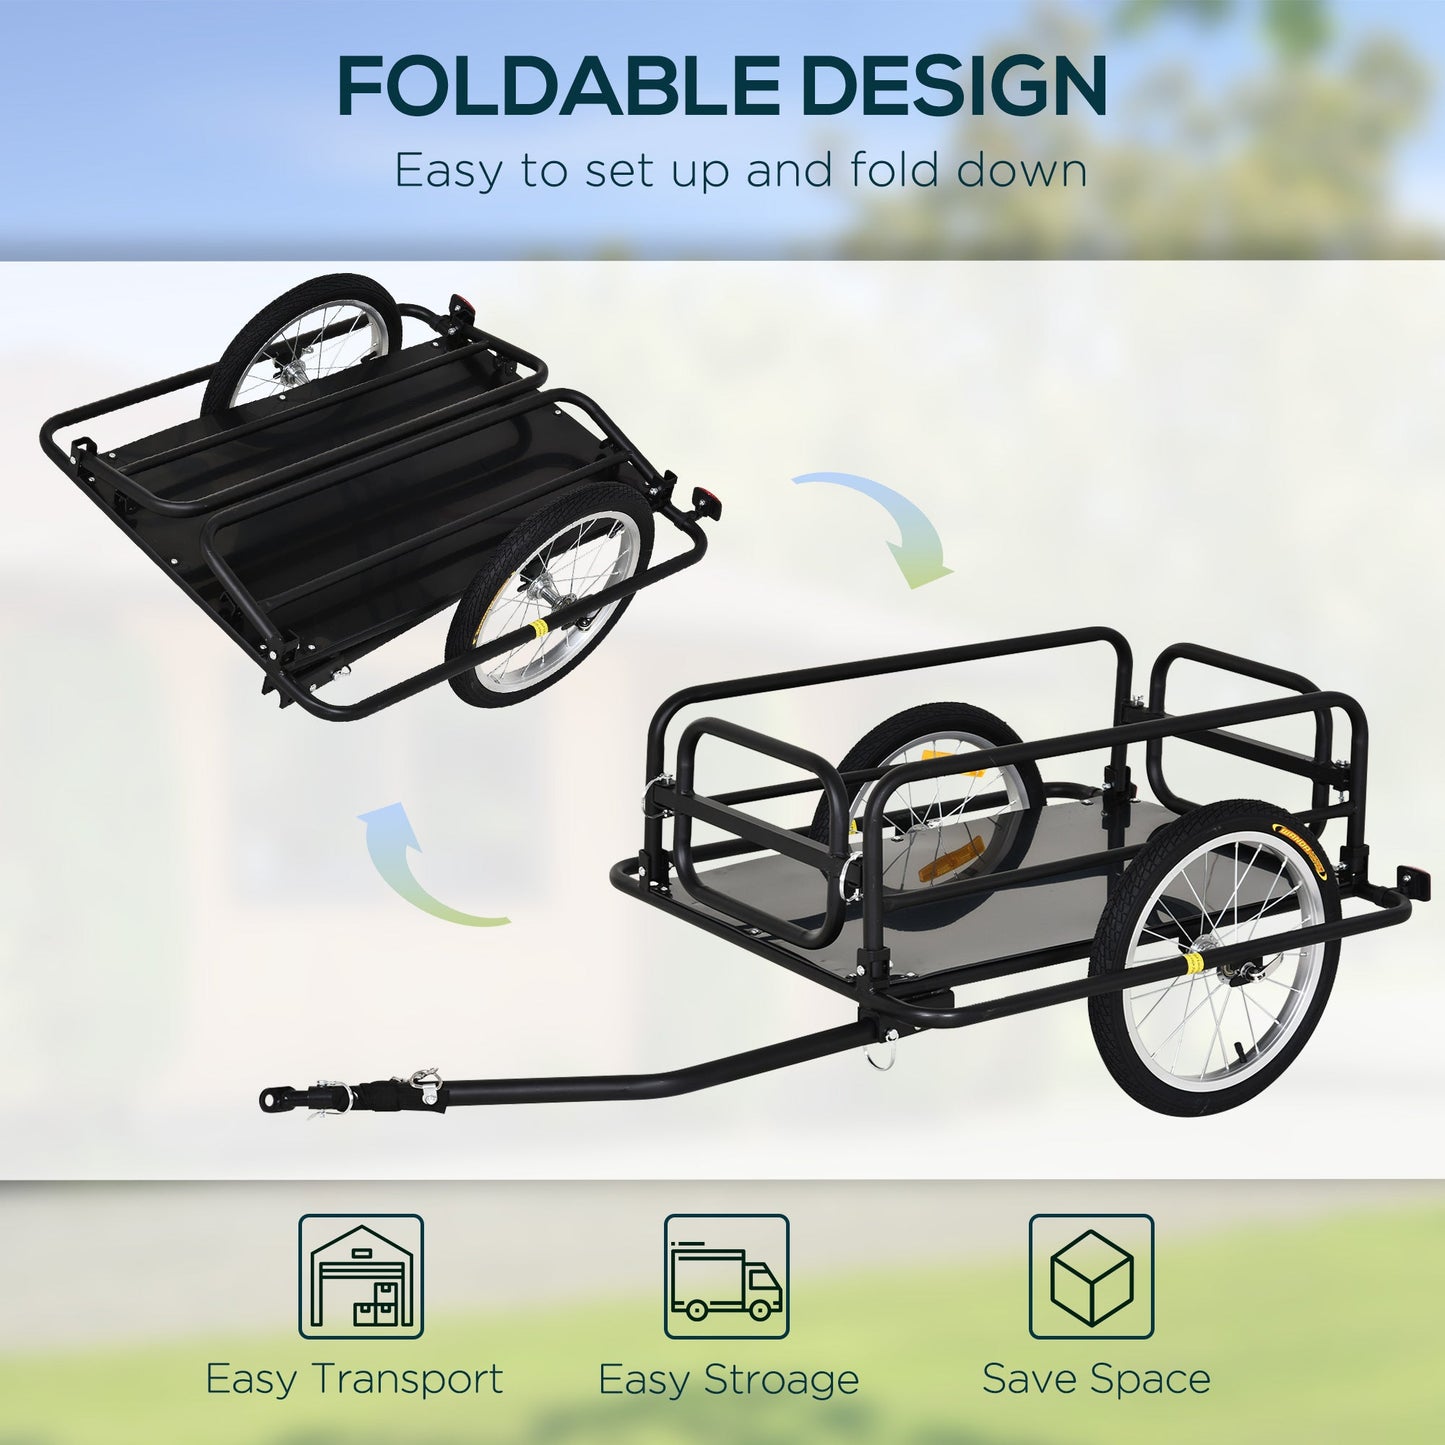 Sports and Fitness-Foldable Bike Cargo Trailer Bicycle Cart Wagon Trailer w/ Hitch, 16'' Wheels, 88 lbs Max Load - Black - Outdoor Style Company